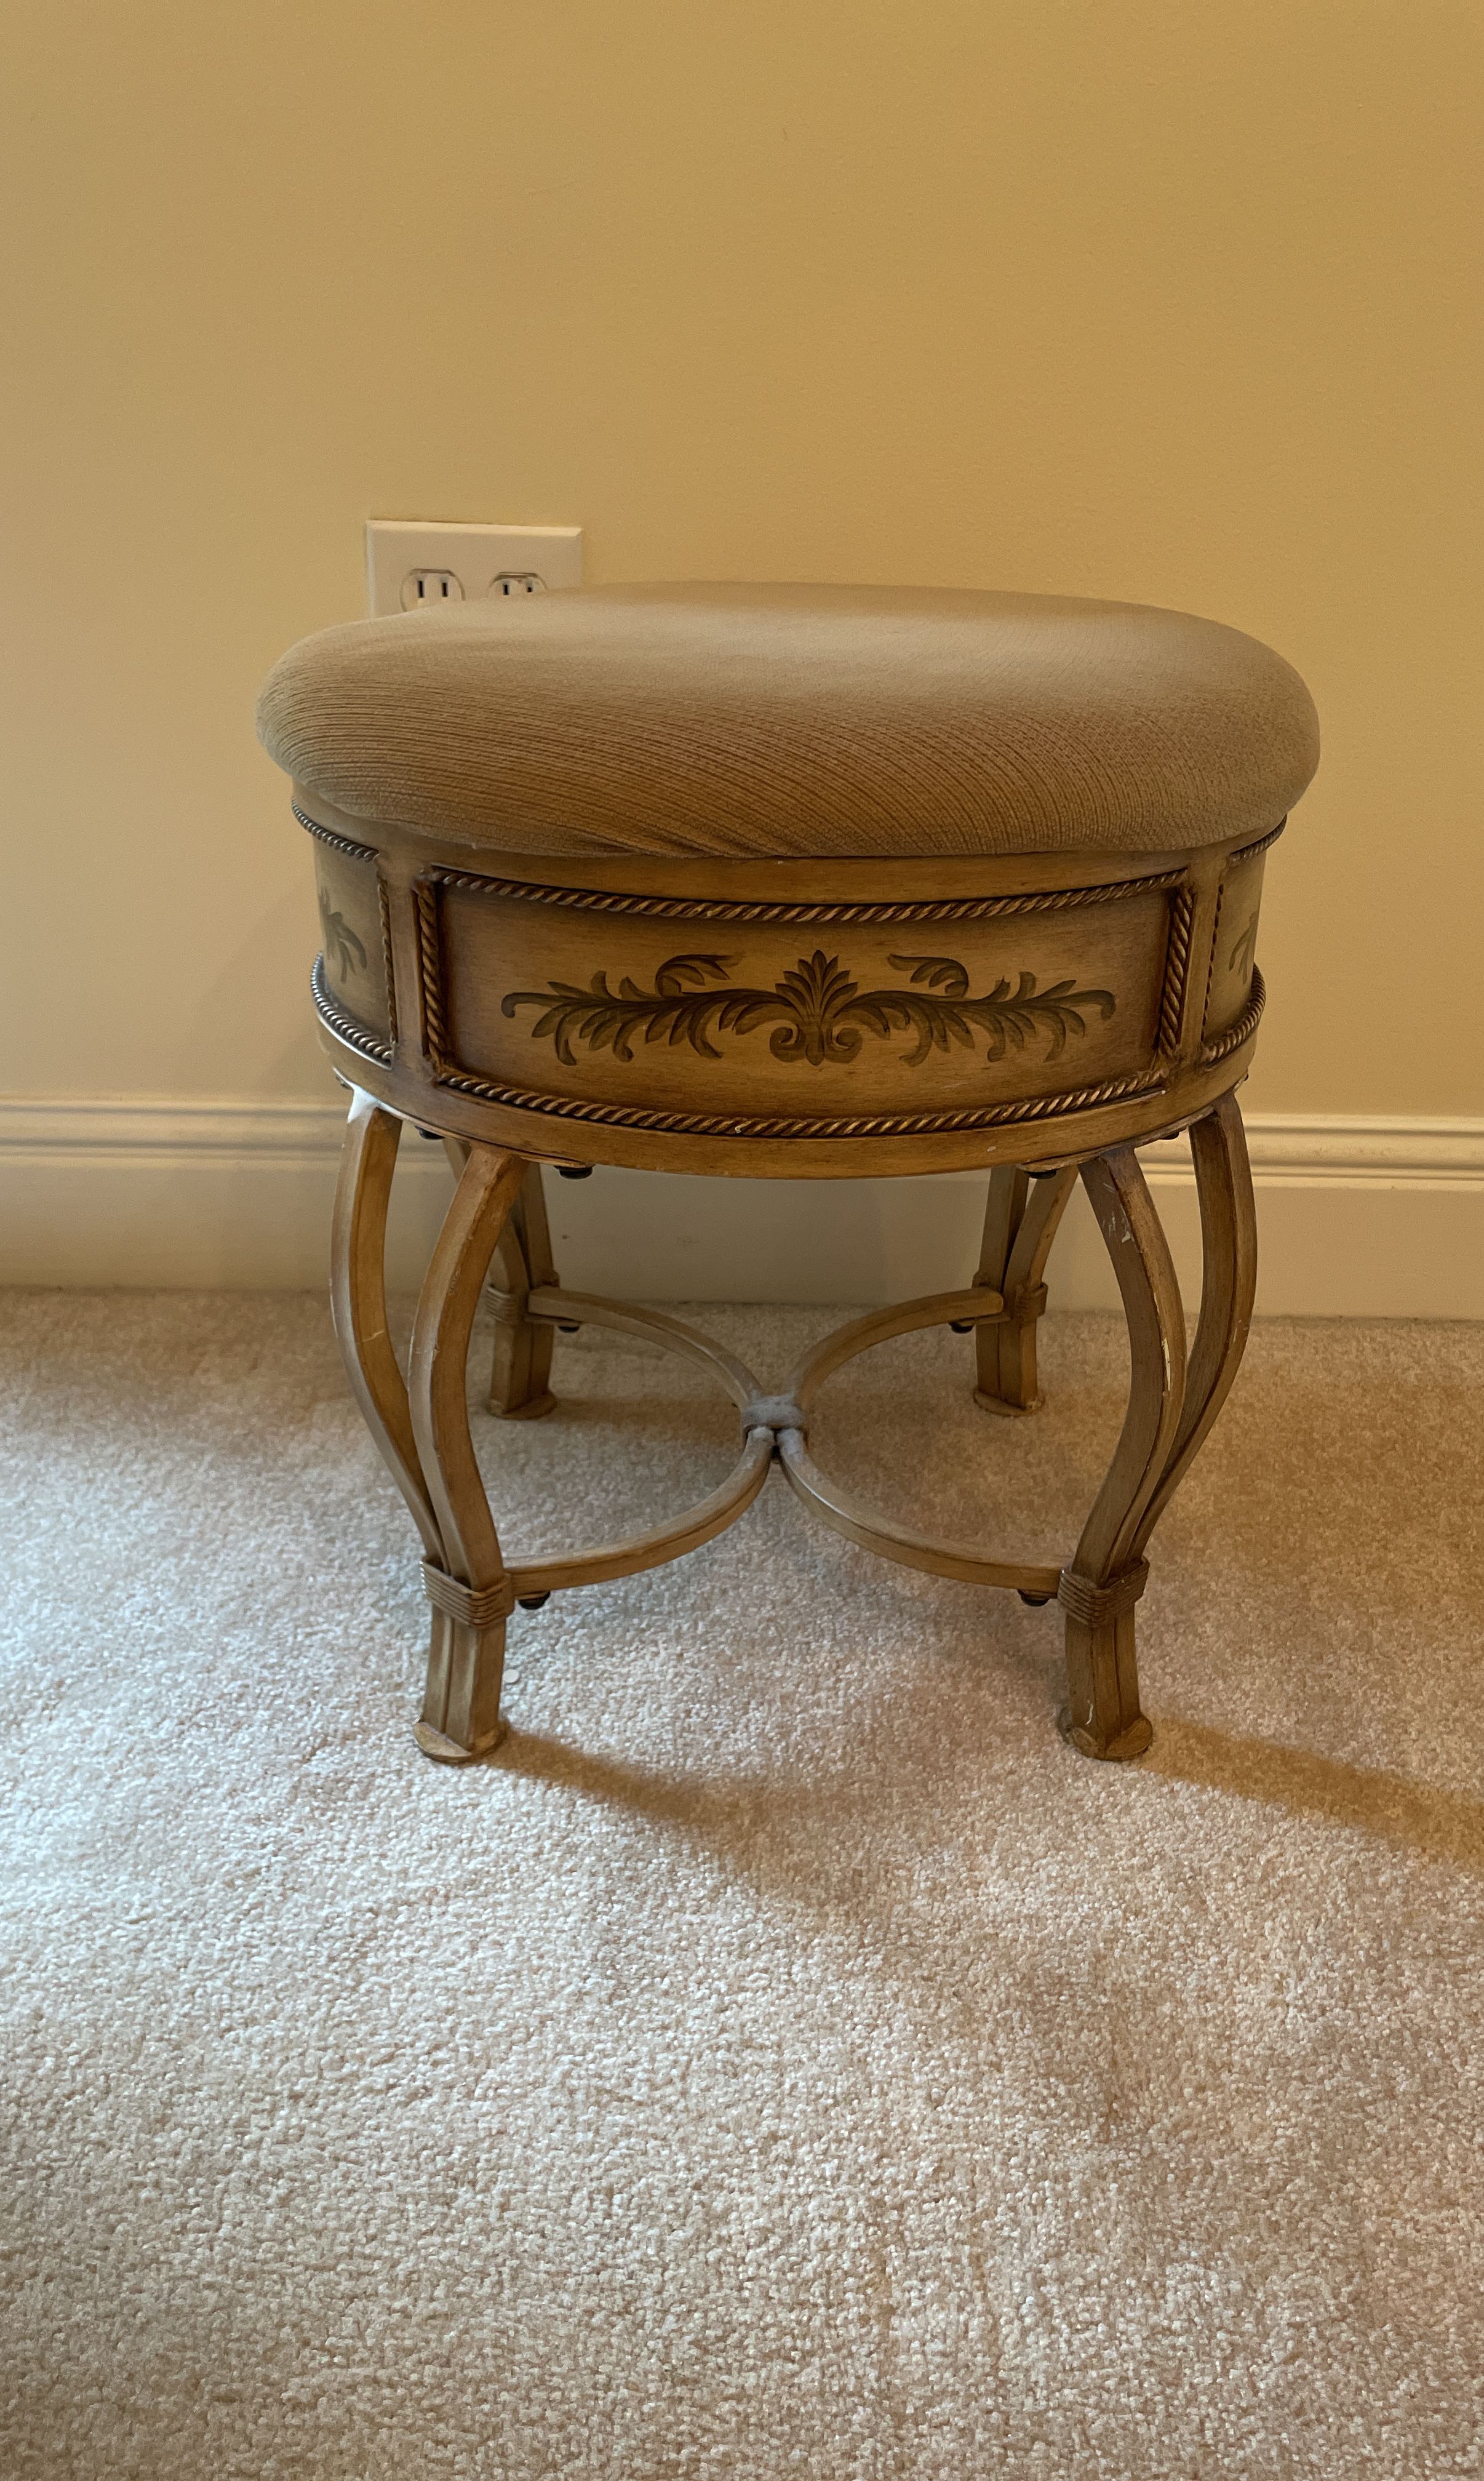 Small foot stool with floral needle point top; 12598-051B - R.H. Lee & Co.  Auctioneers